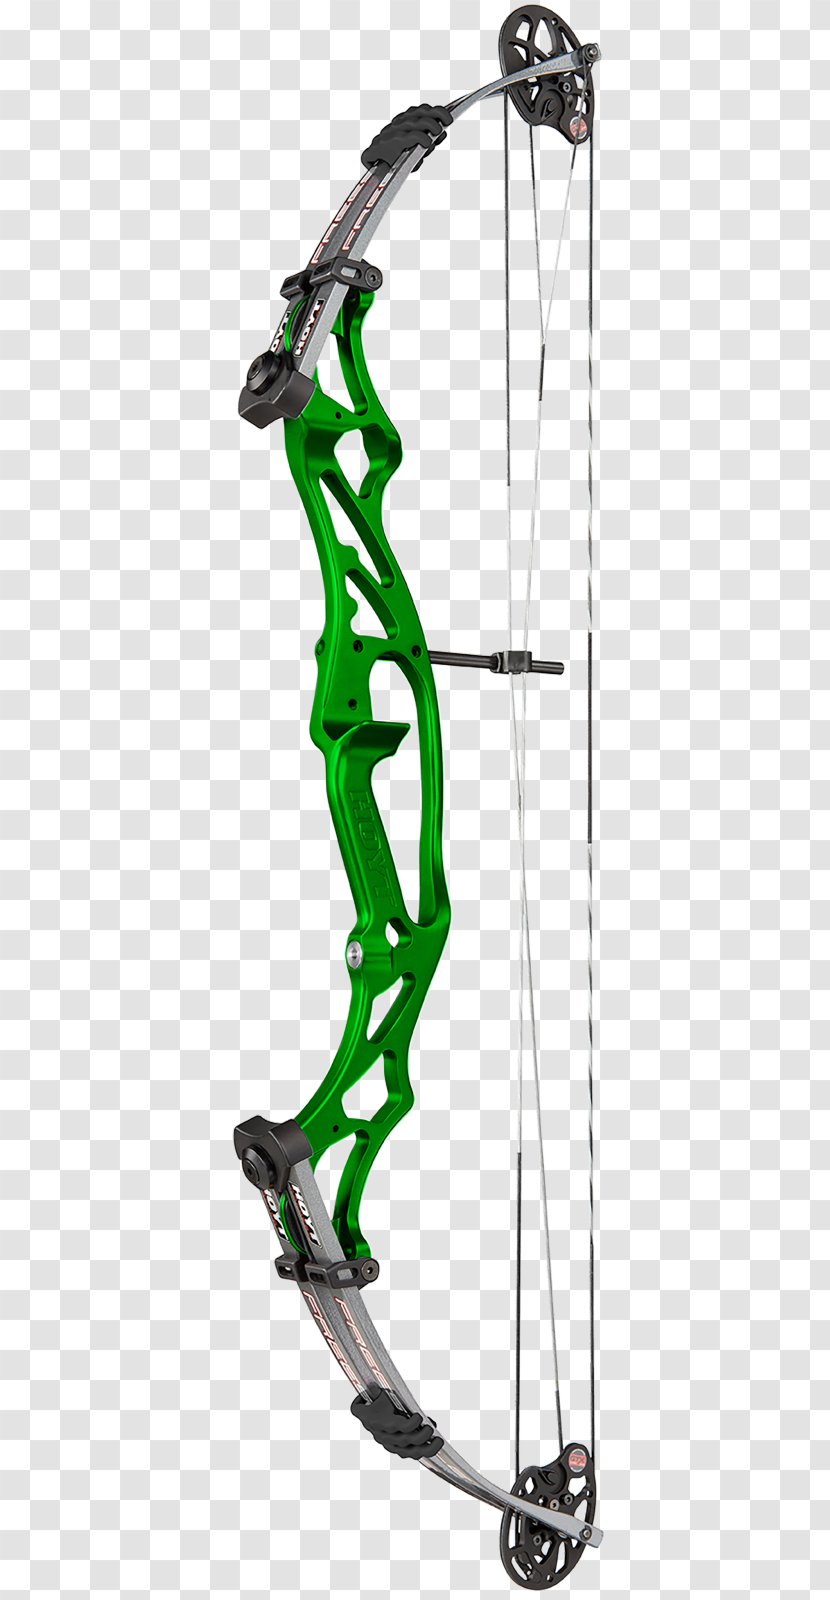 Compound Bows Archery Bow And Arrow Composite - Bowhunting Transparent PNG